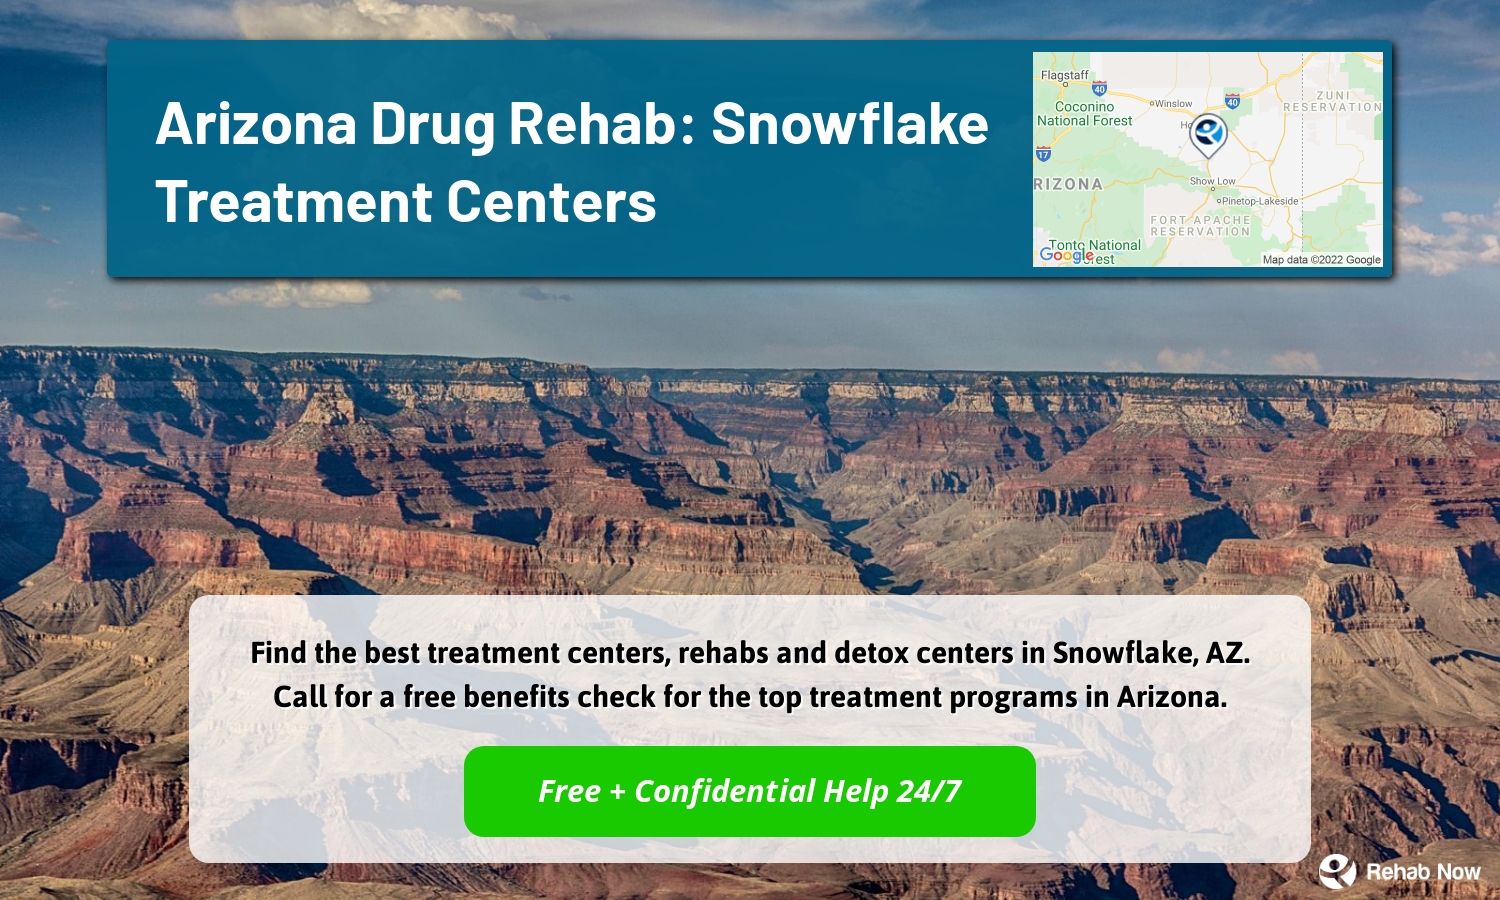 Find the best treatment centers, rehabs and detox centers in Snowflake, AZ. Call for a free benefits check for the top treatment programs in Arizona.